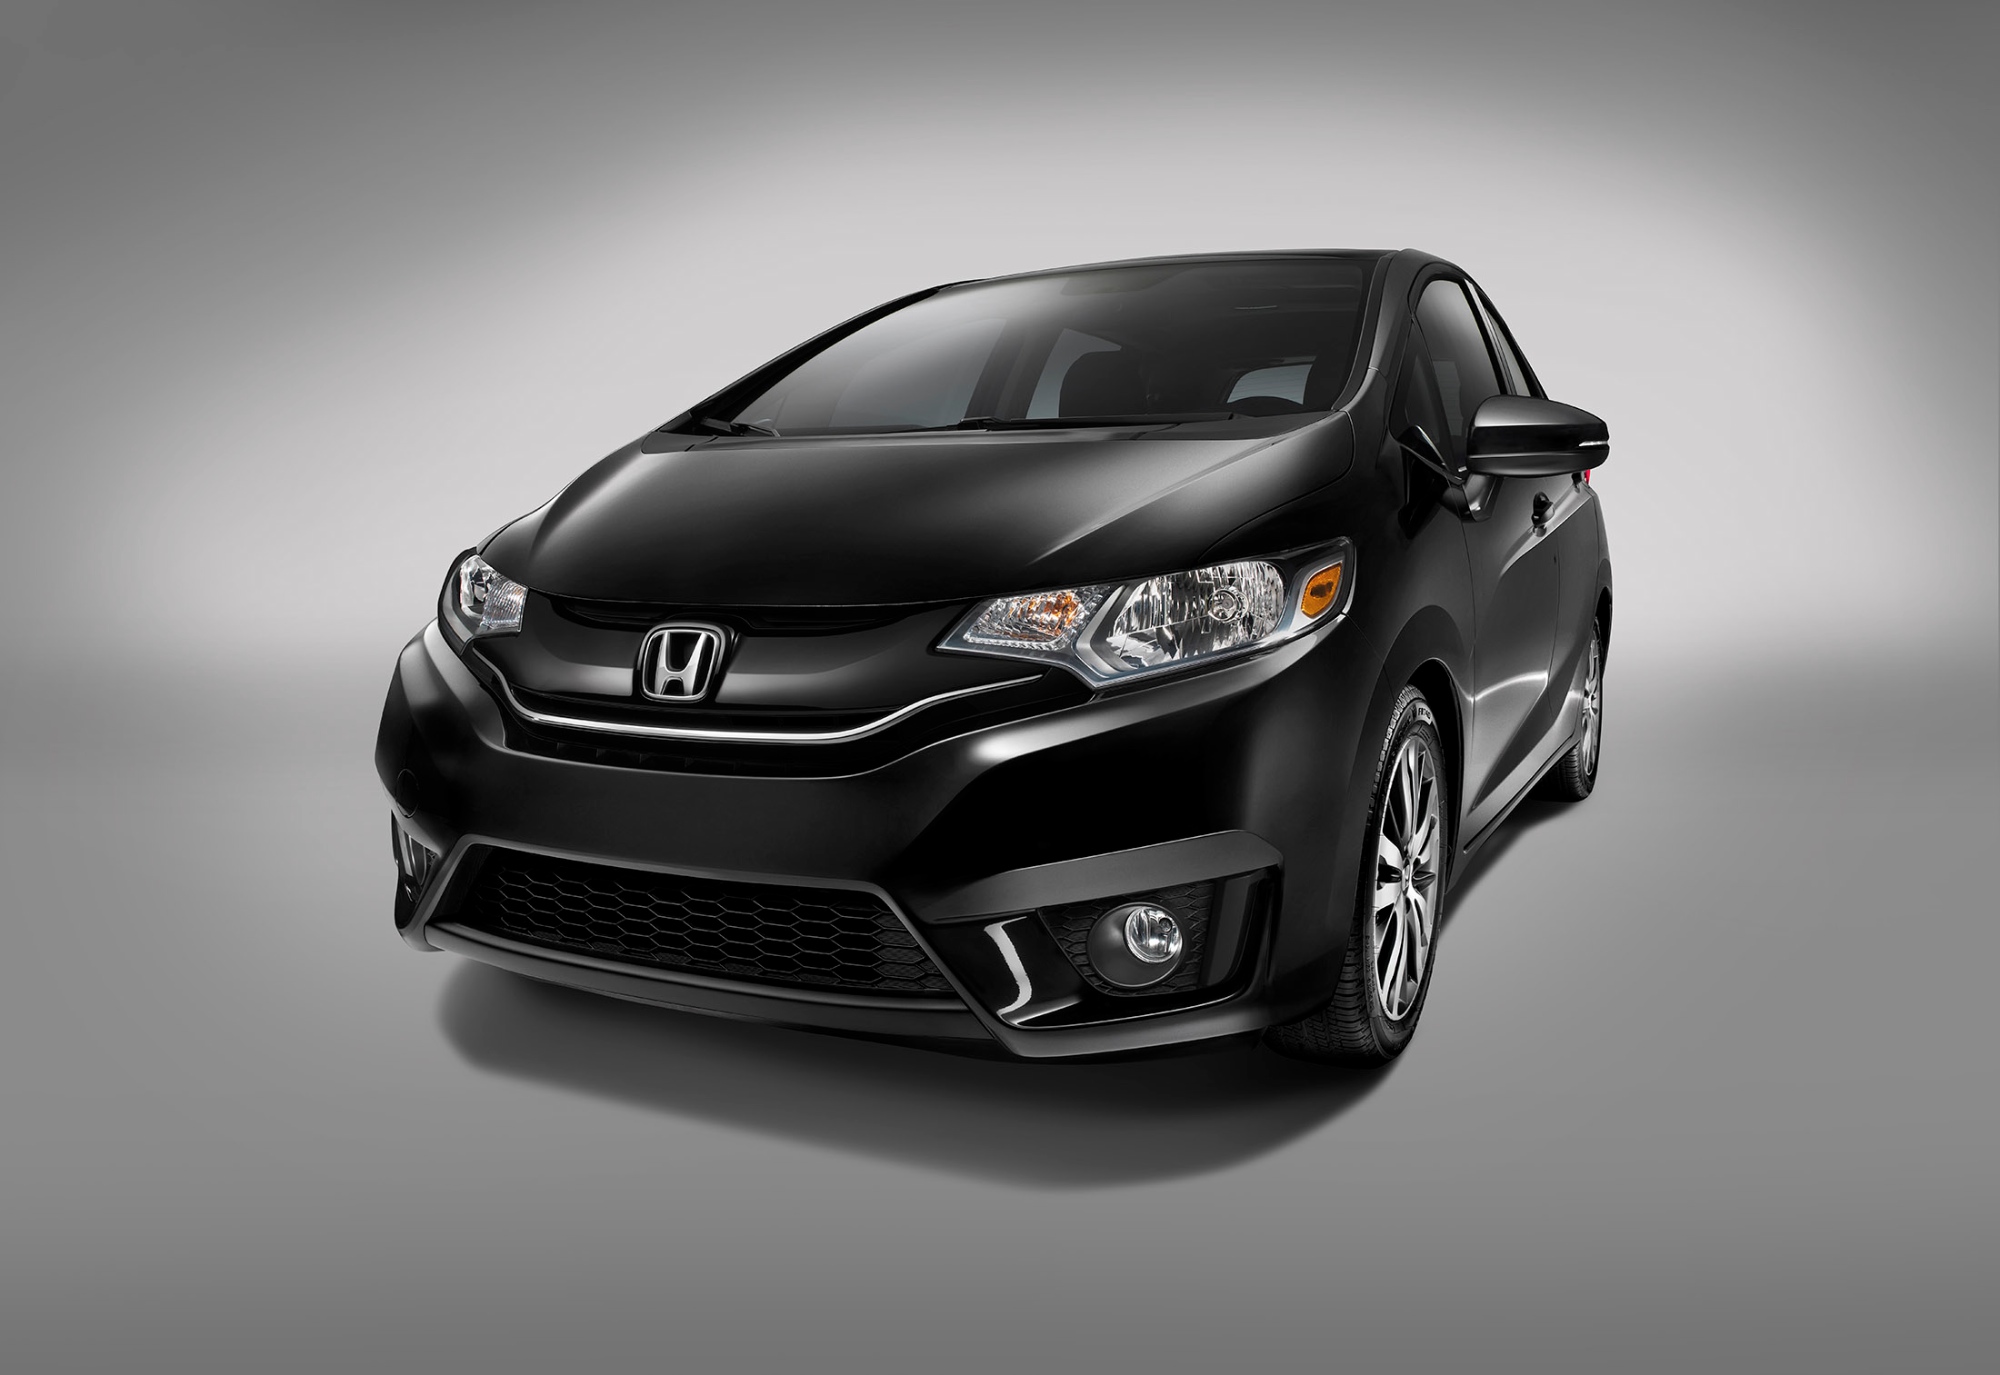 2015 Honda Fit Is a Cool New Urban Car for $15,525 - autoevolution